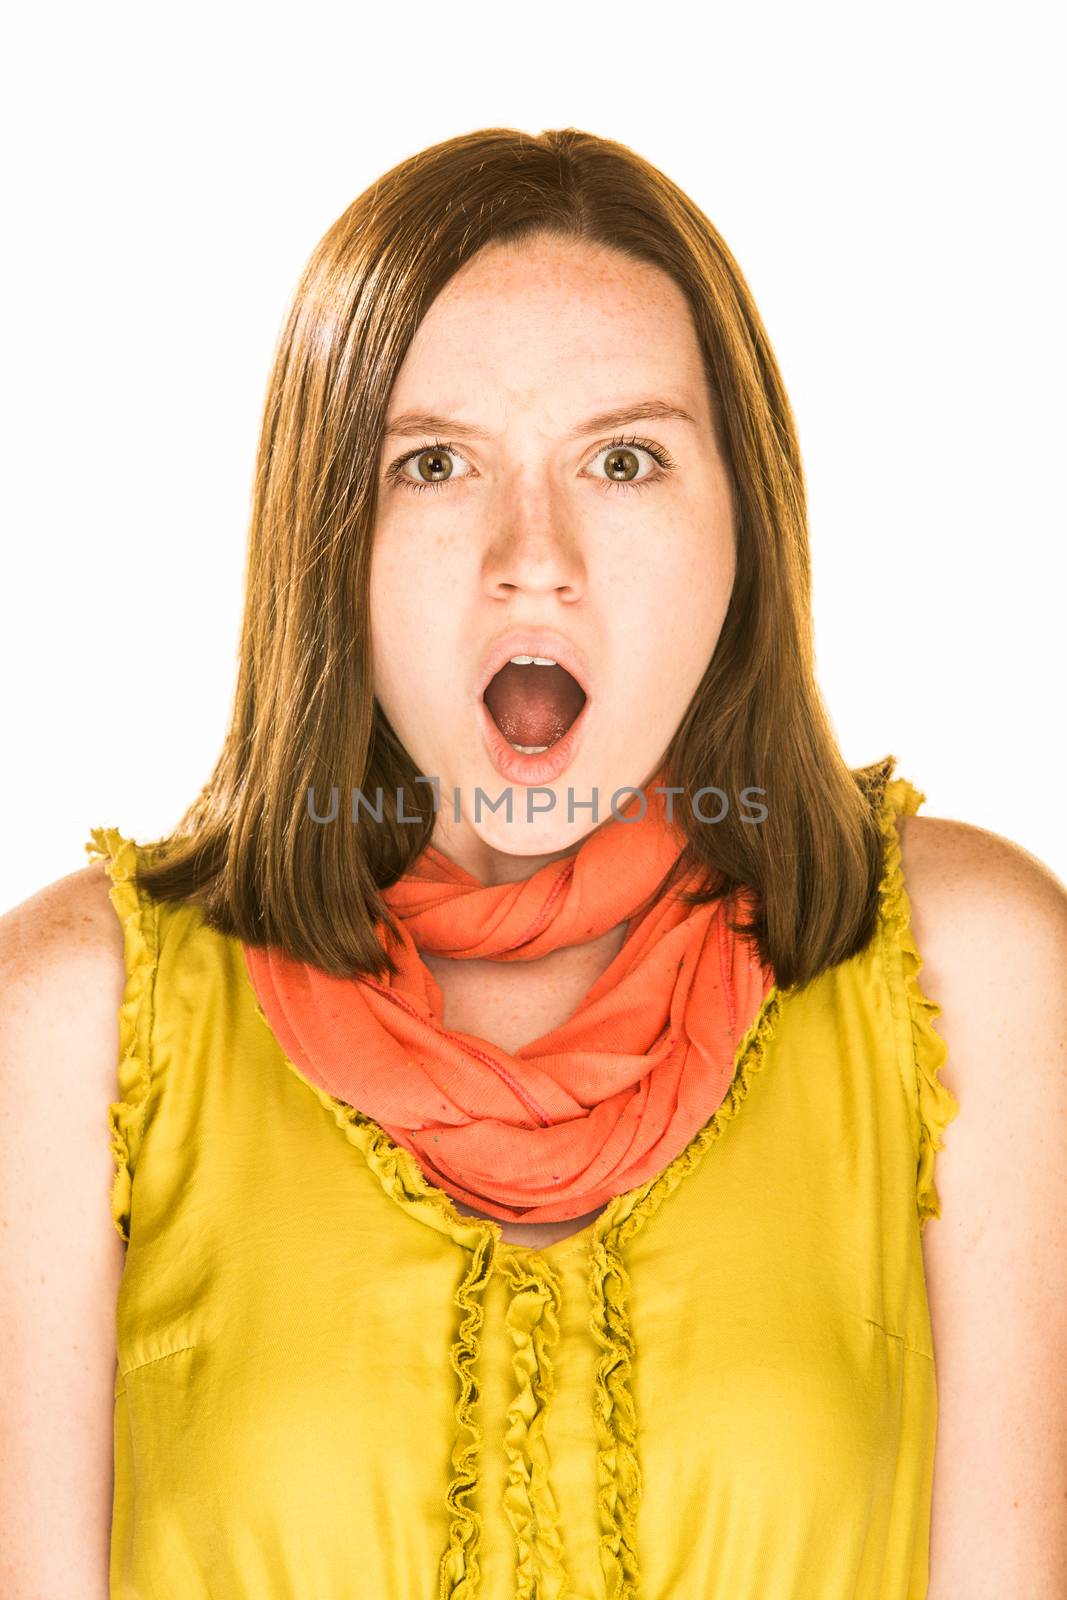 Pretty girl with an afraid expression on white background